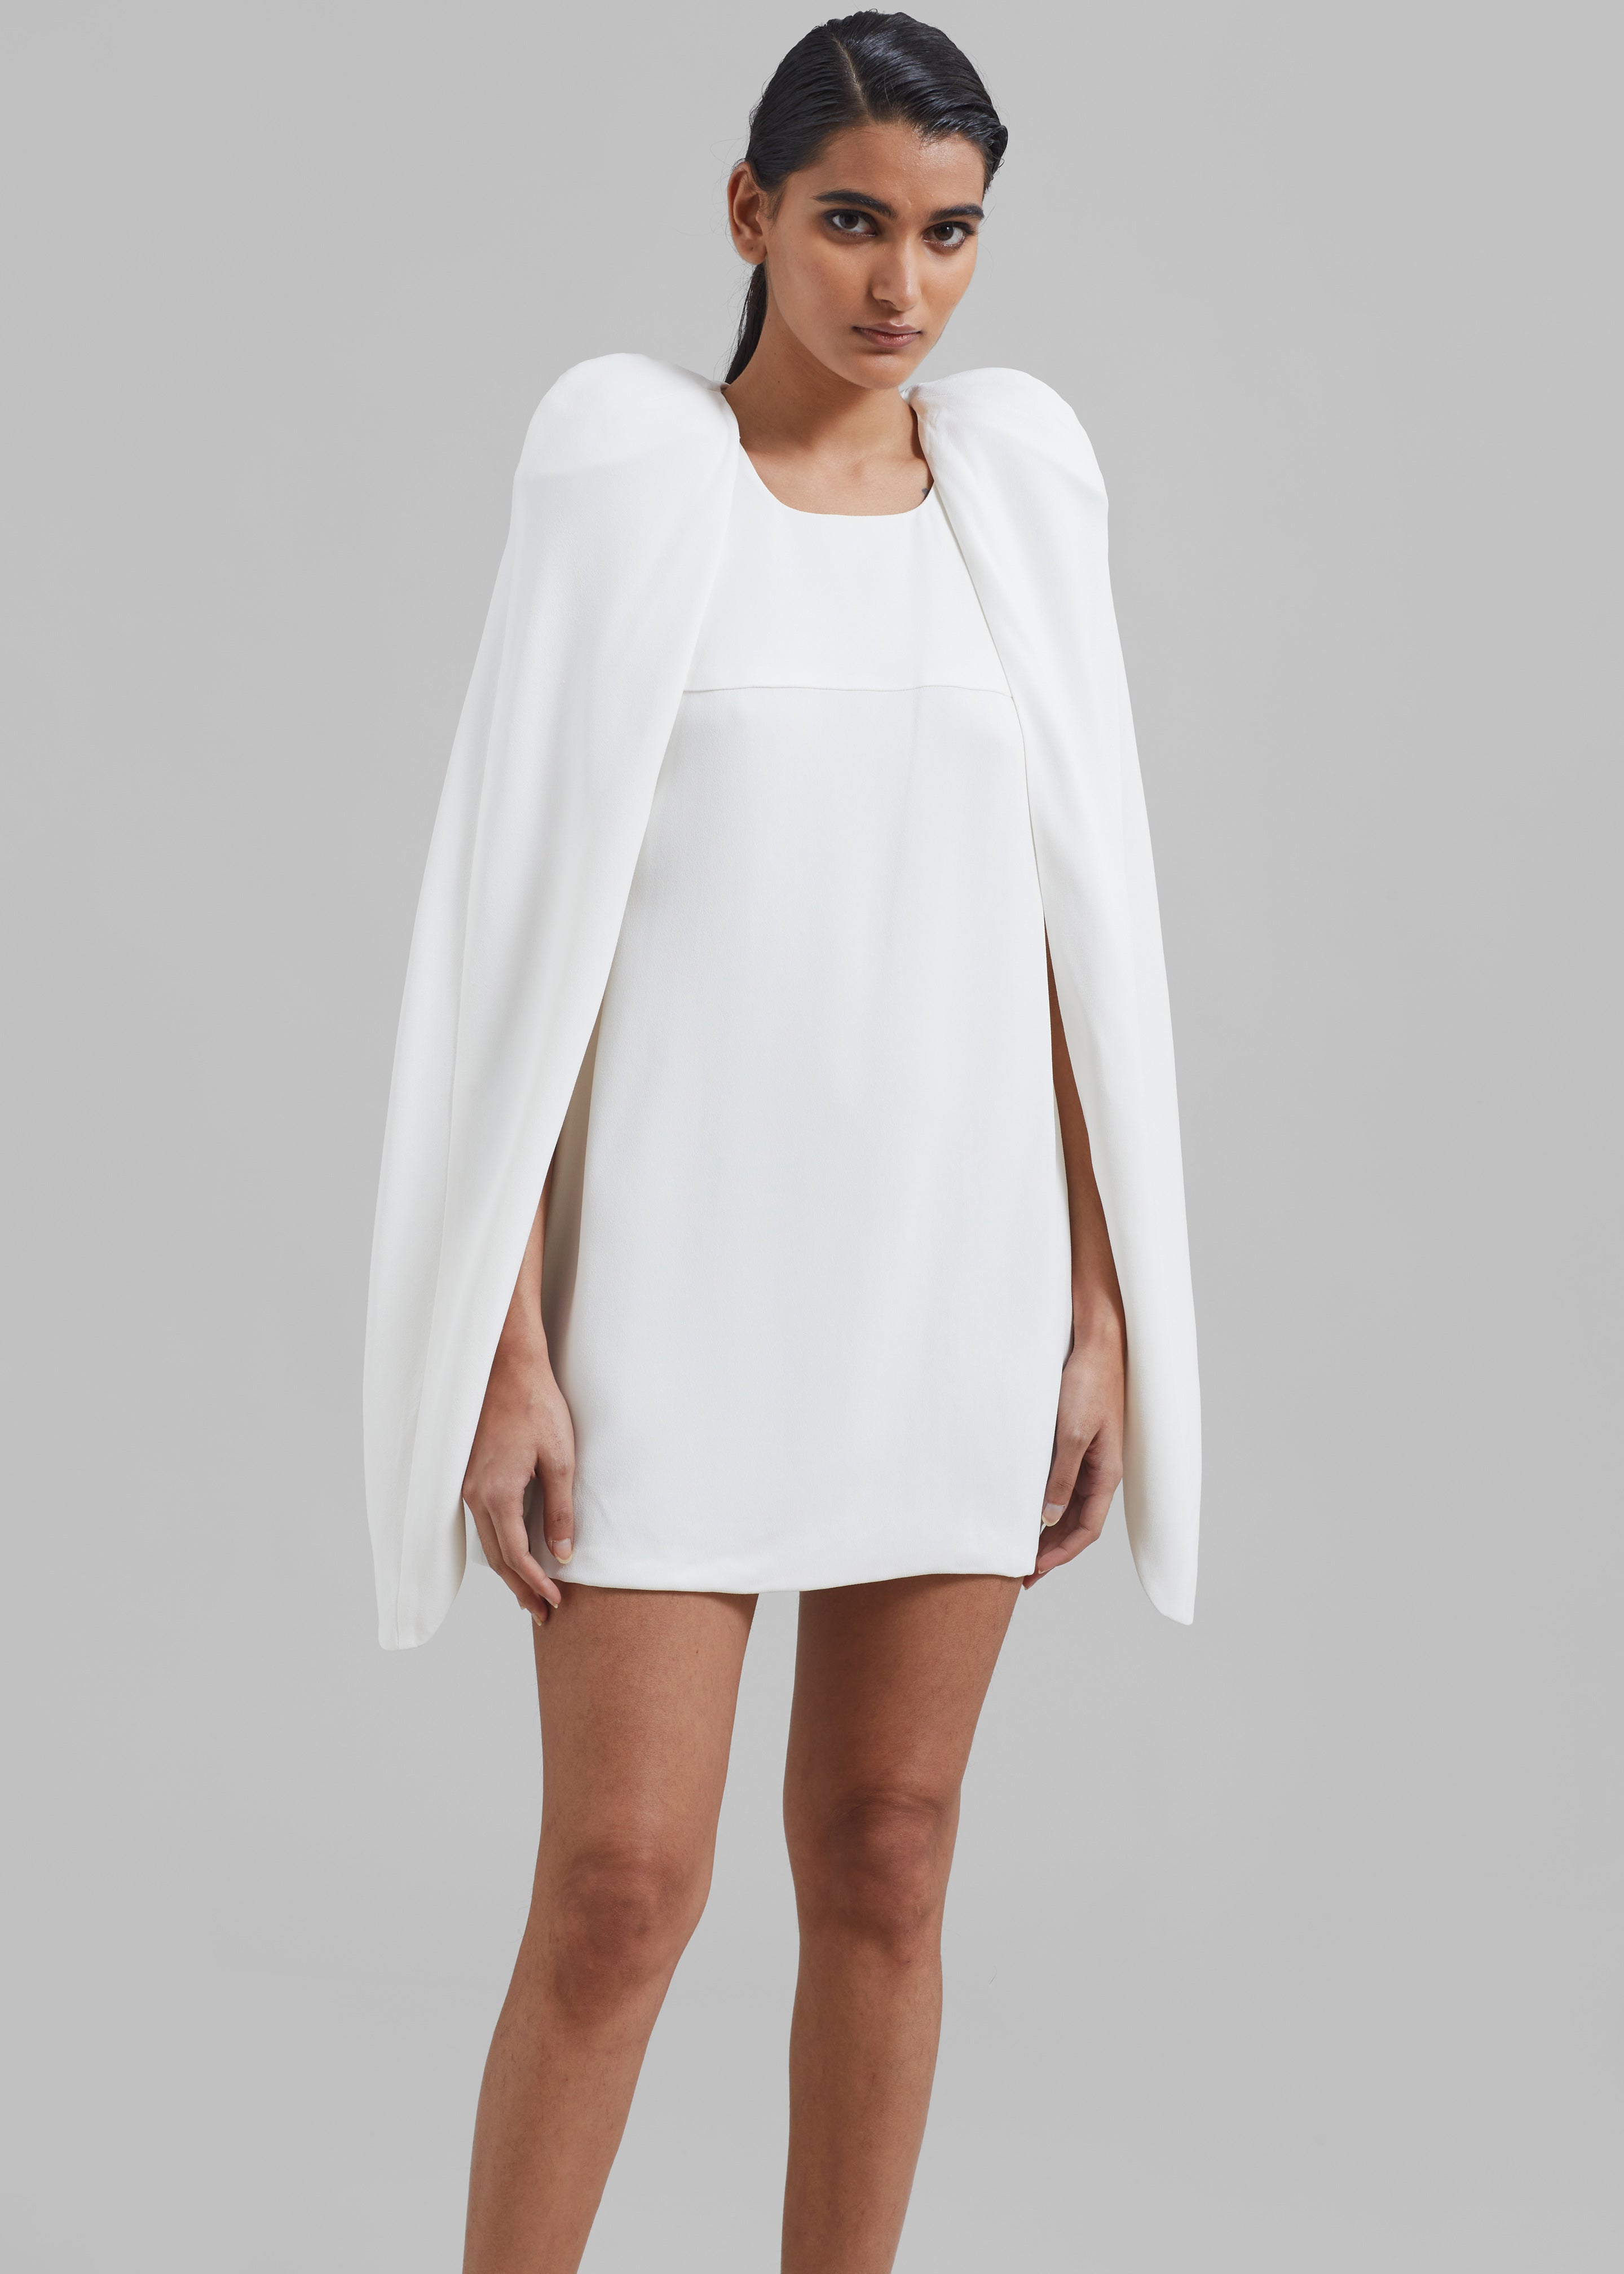 Bevza Mini Dress With Wings - White - 4